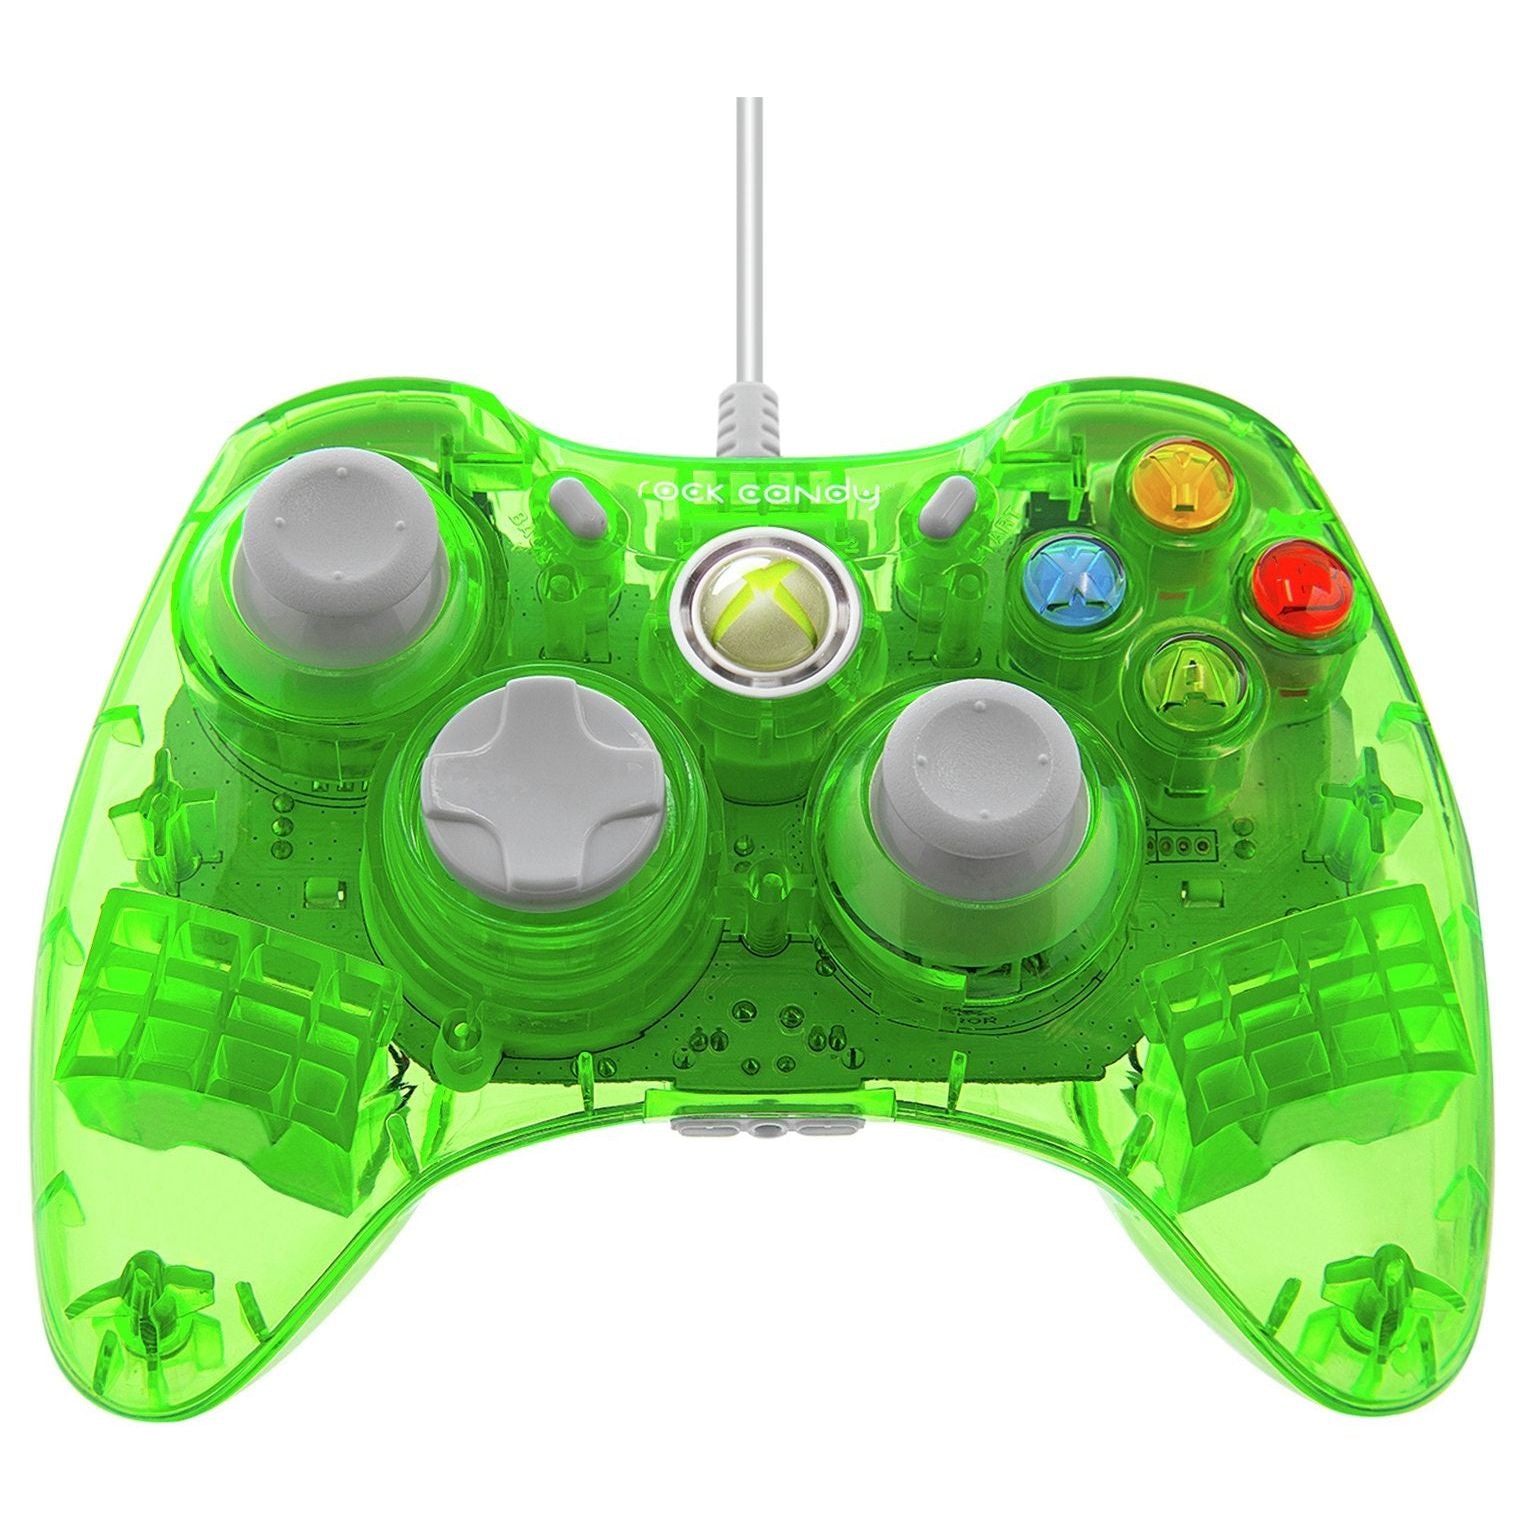 Manette filaire Rock Candy XBOX 360 (Vert / Occasion)